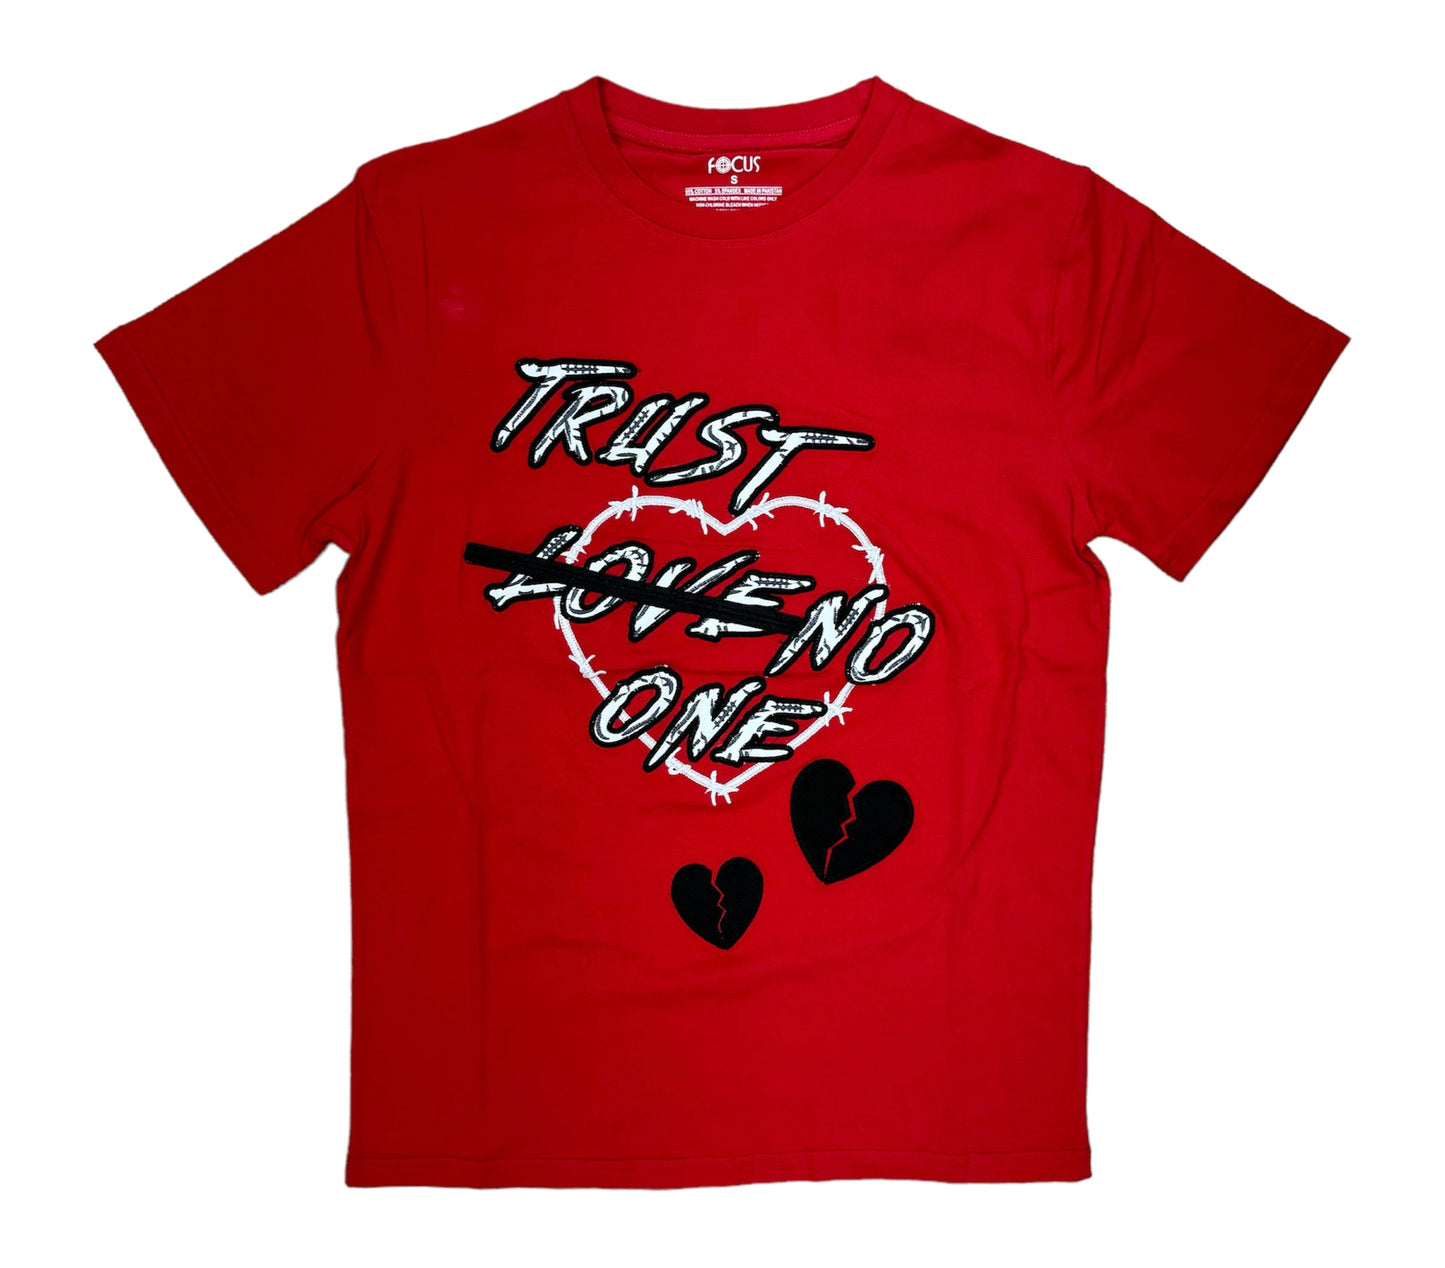 Focus Trust Love No One Red T-shirt